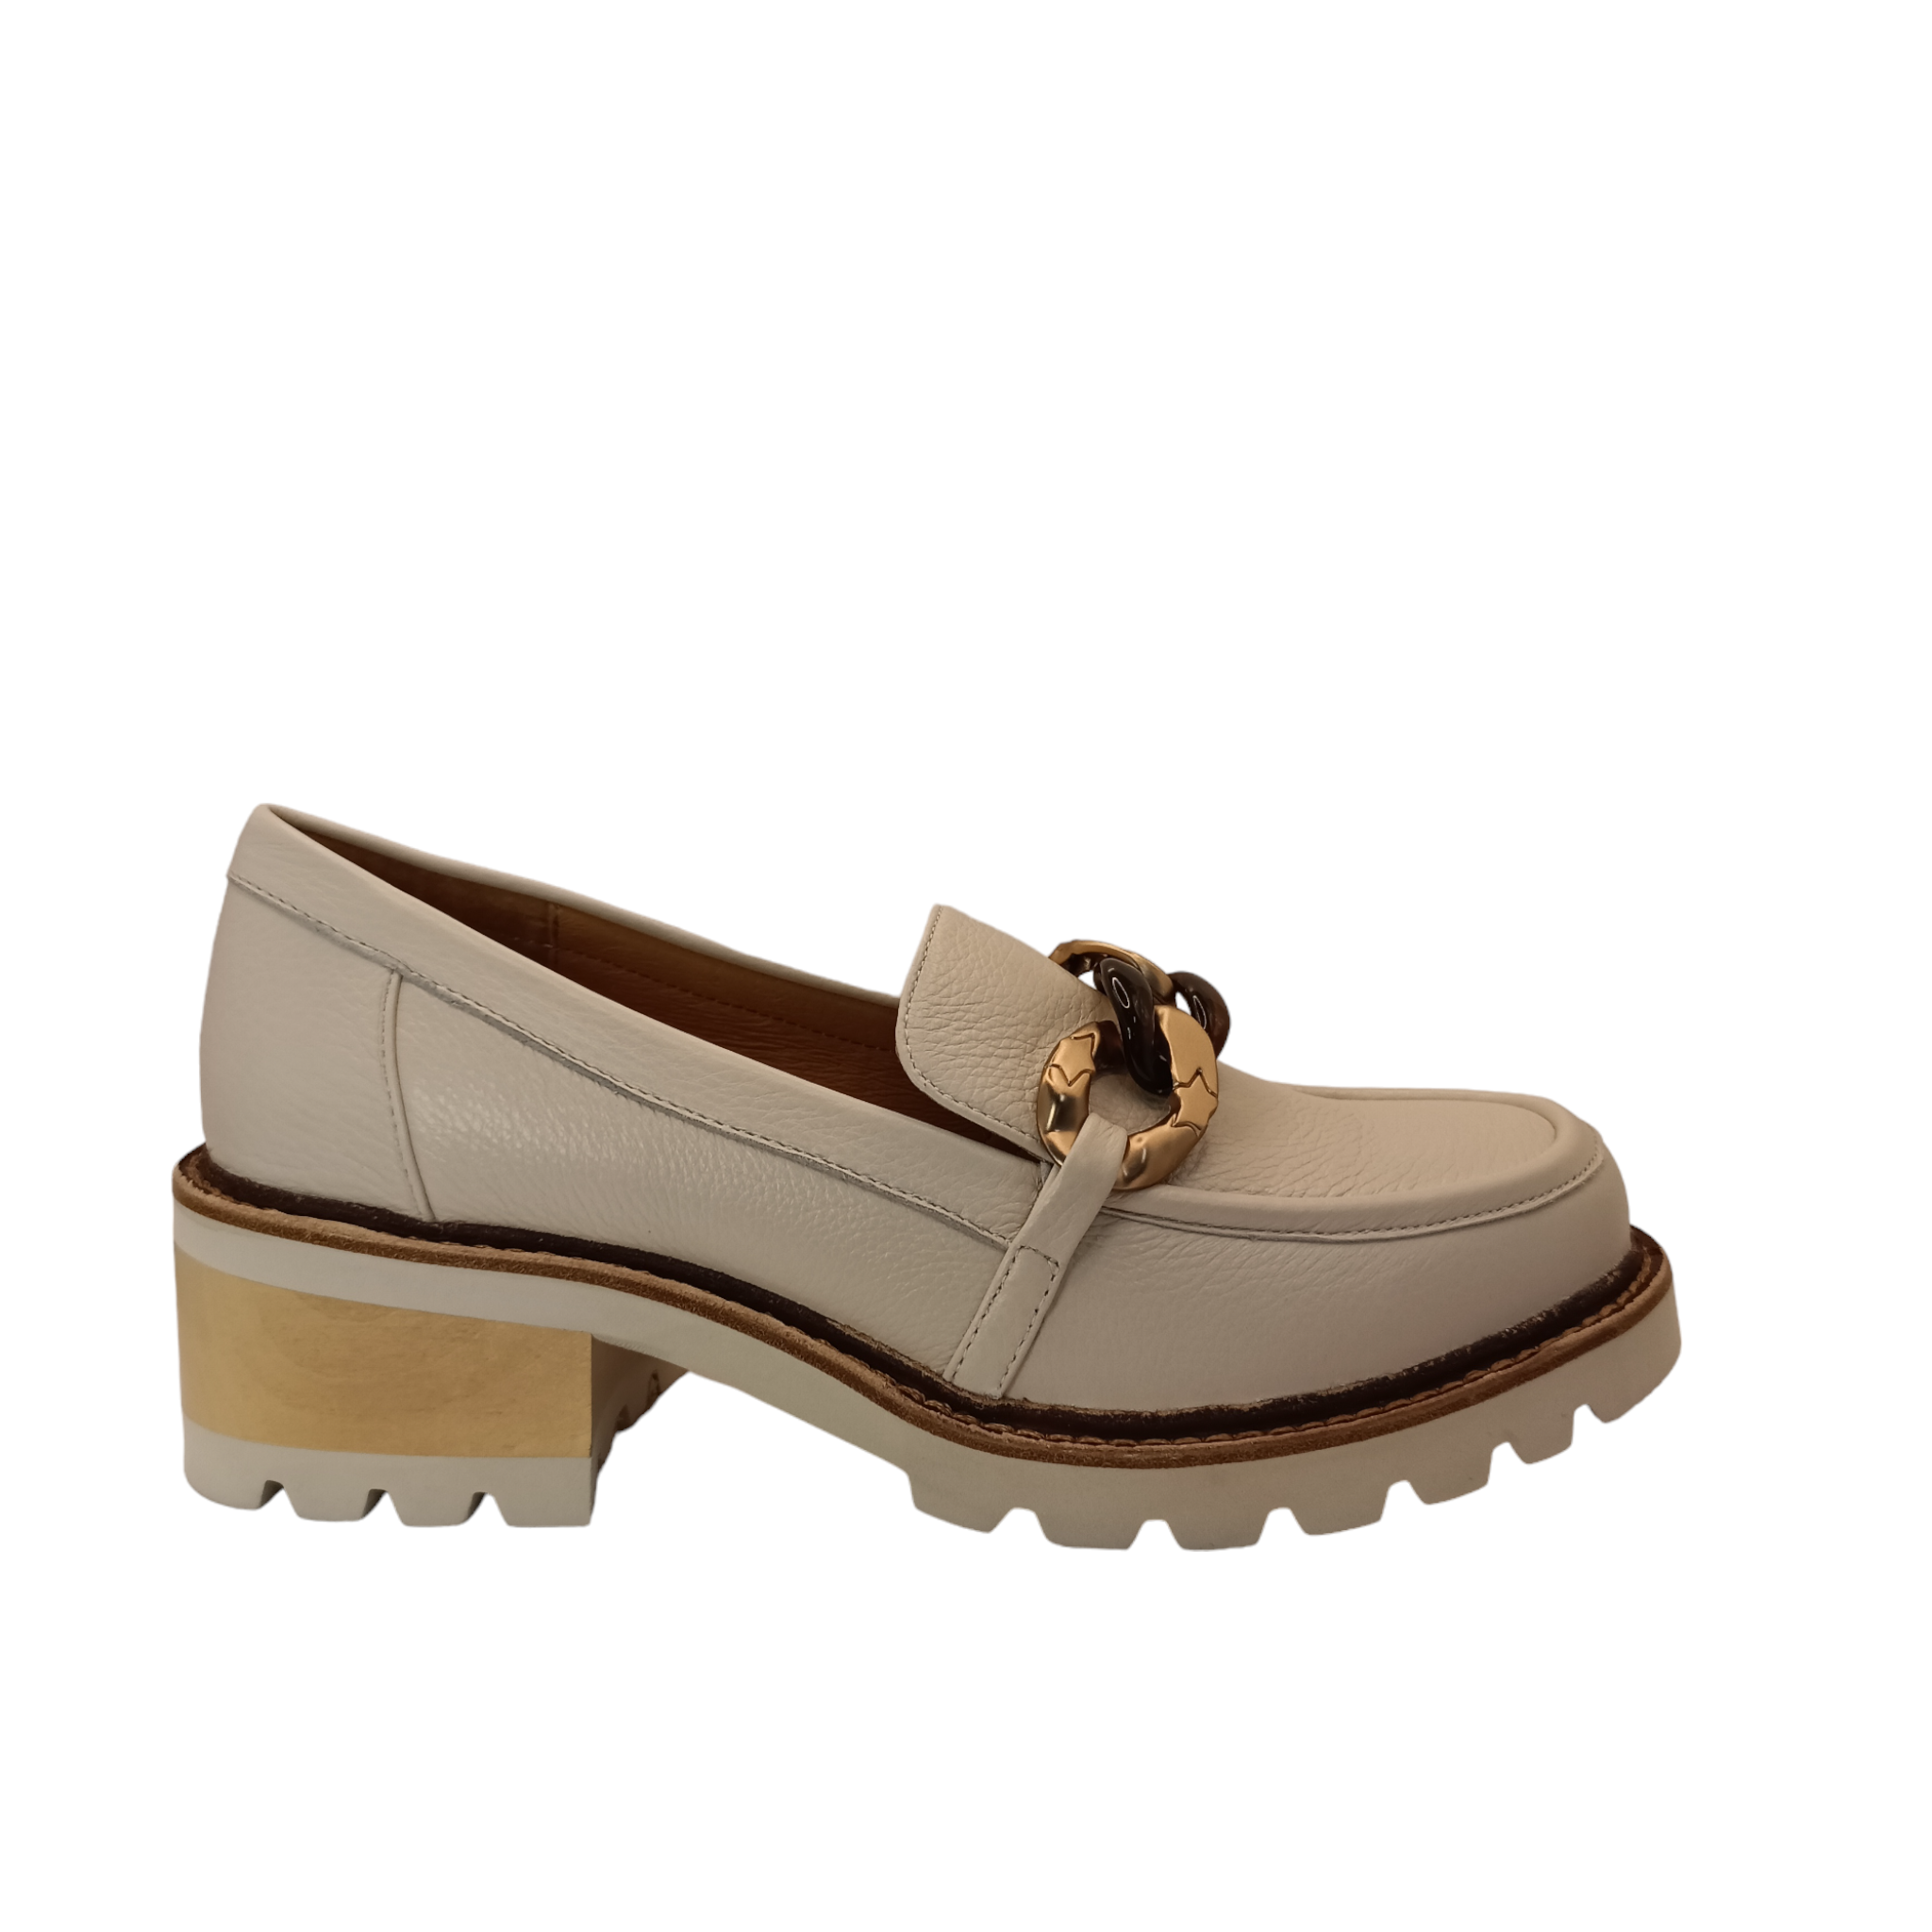 Shop Doctrin Bresley - with shoe&amp;me - from Bresley - Shoes - shoes, Winter, Womens - [collection]